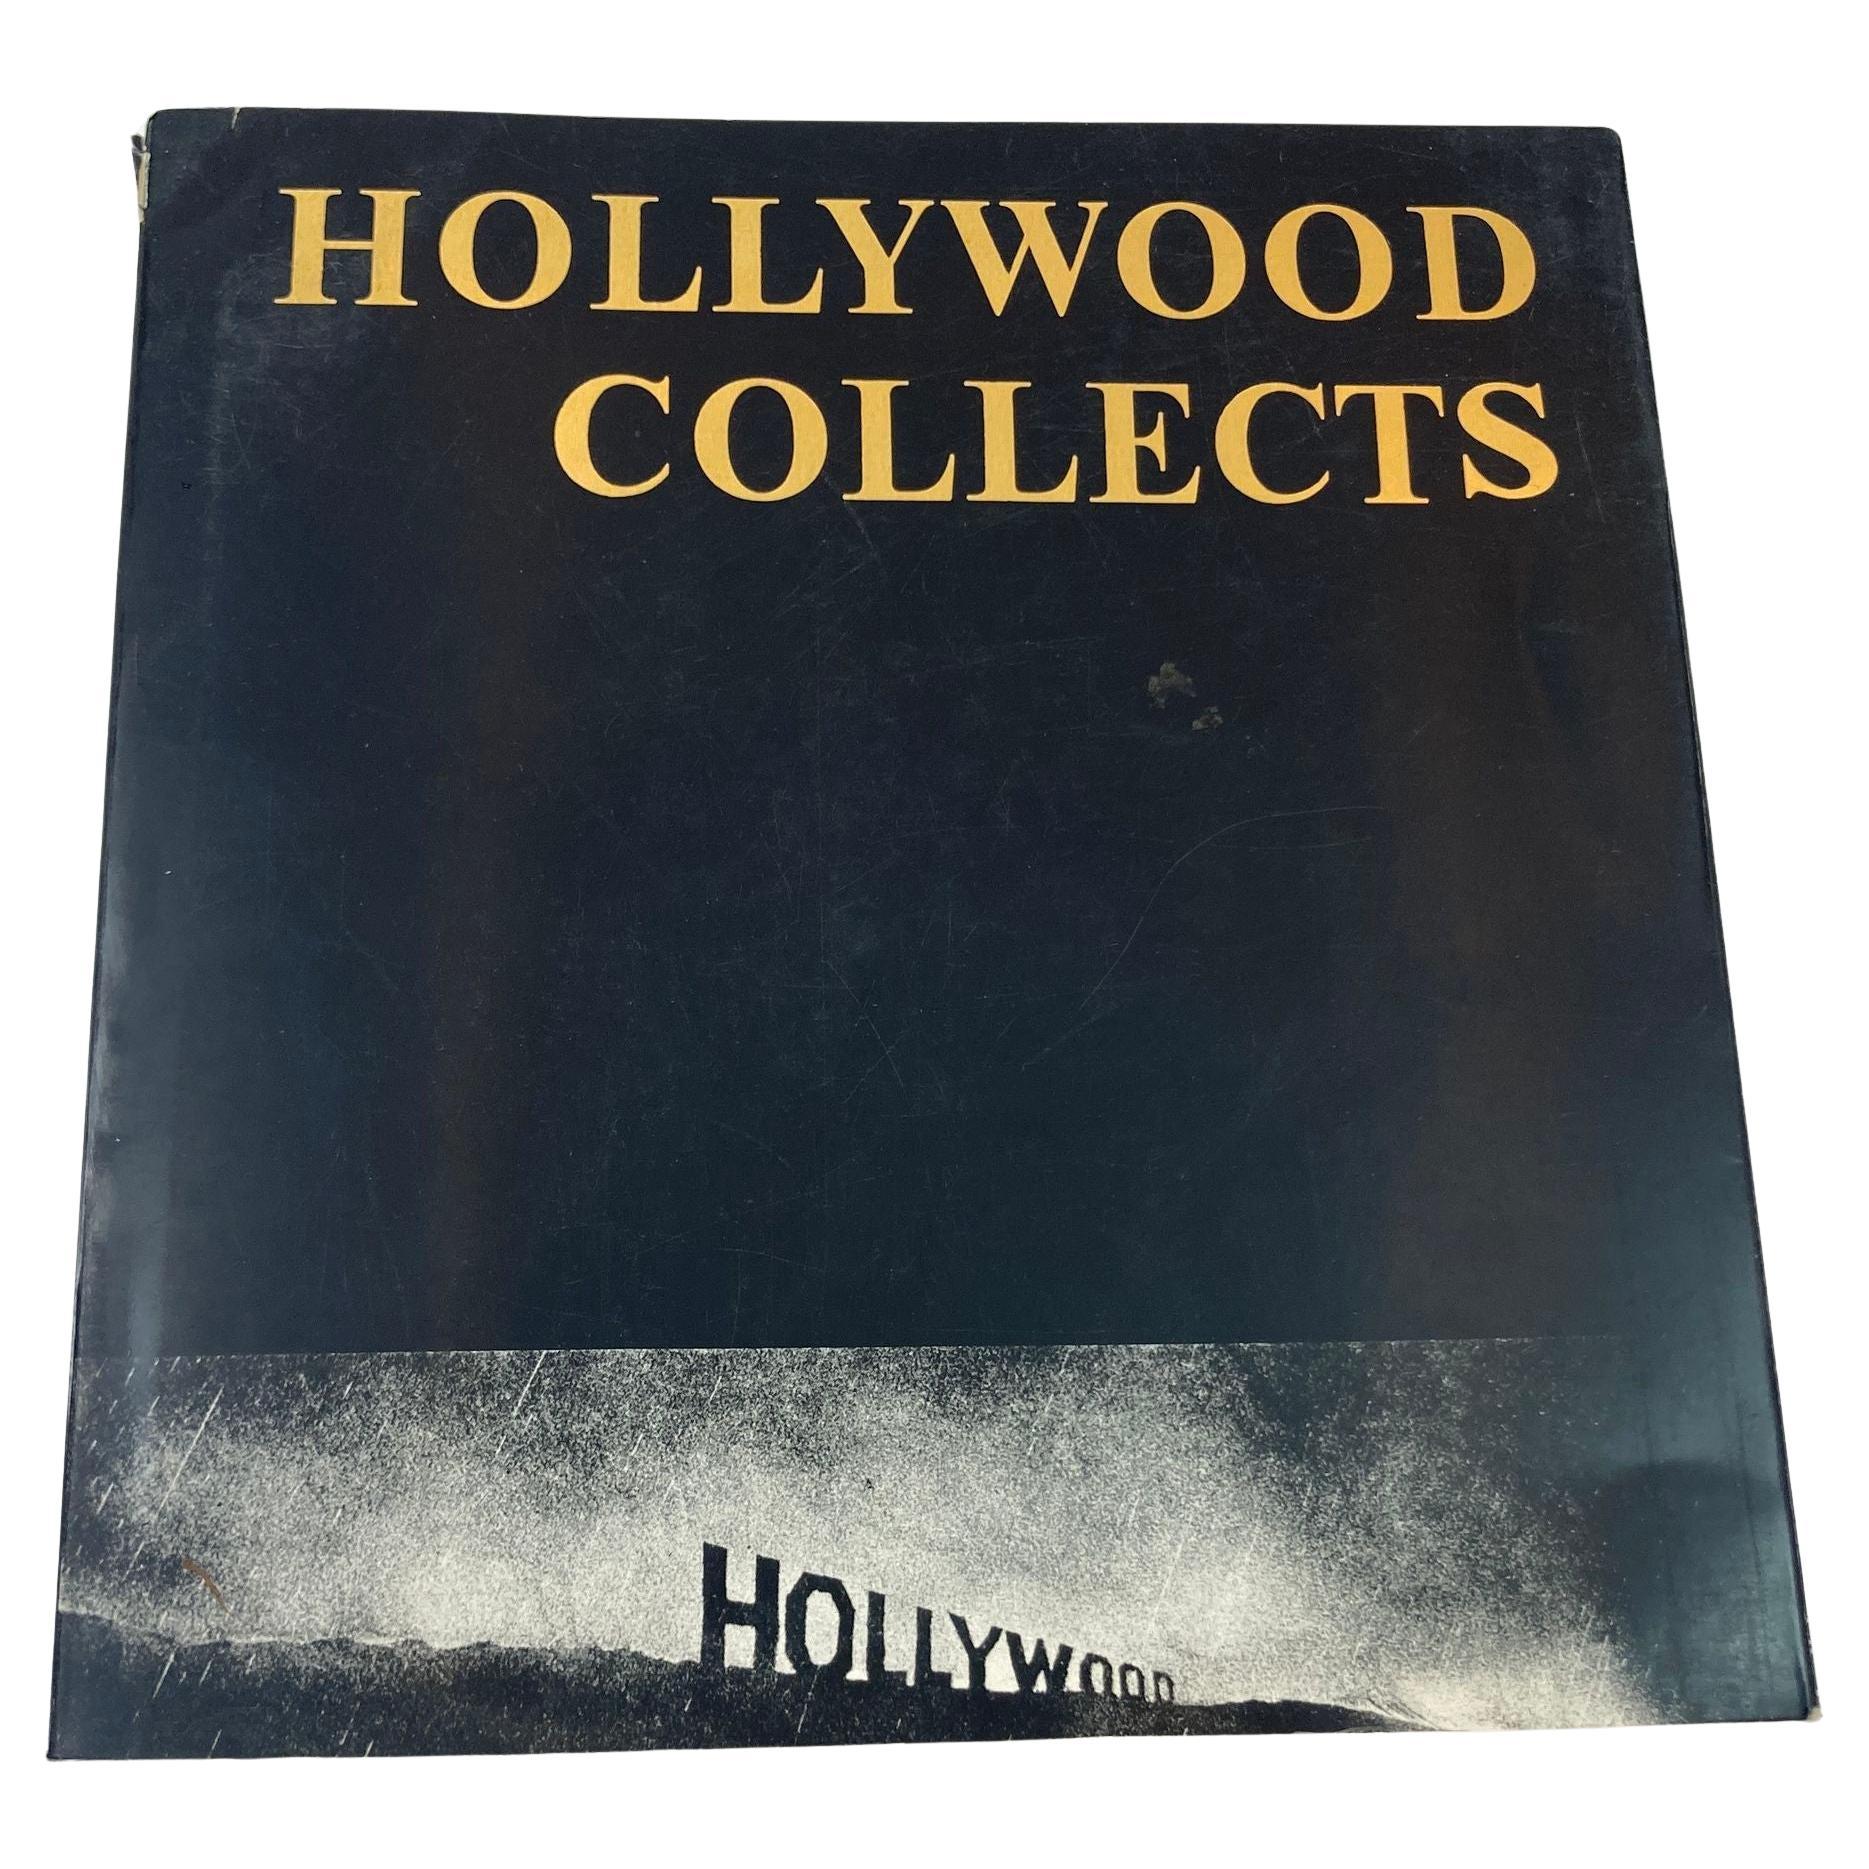 Hollywood Collects An Exhibition from April 5 to May 15 1970 by Henry J. Seldis